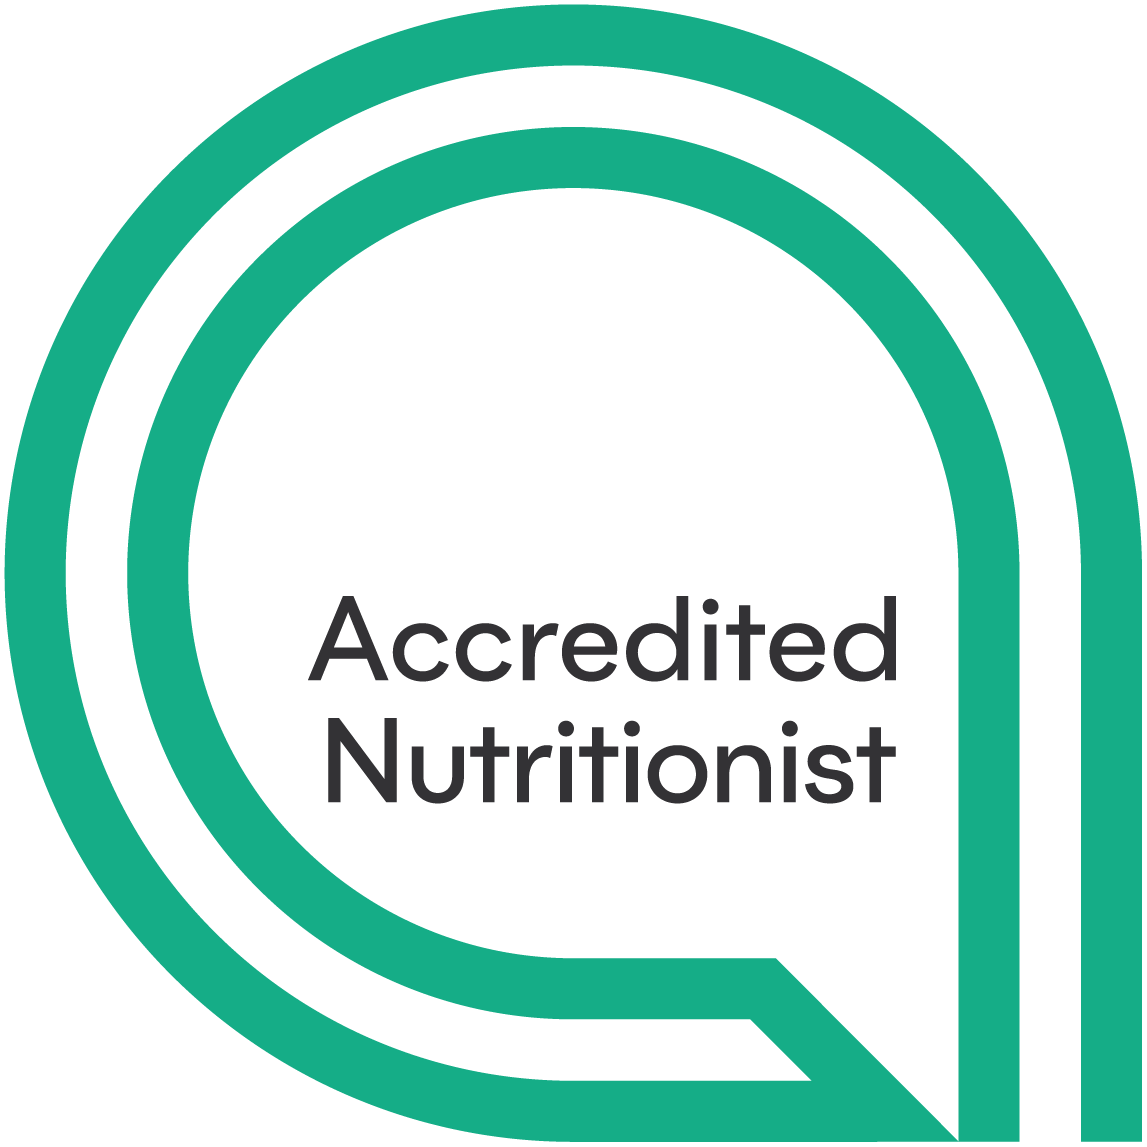 Accredited Nutritionist Logo Green and Black